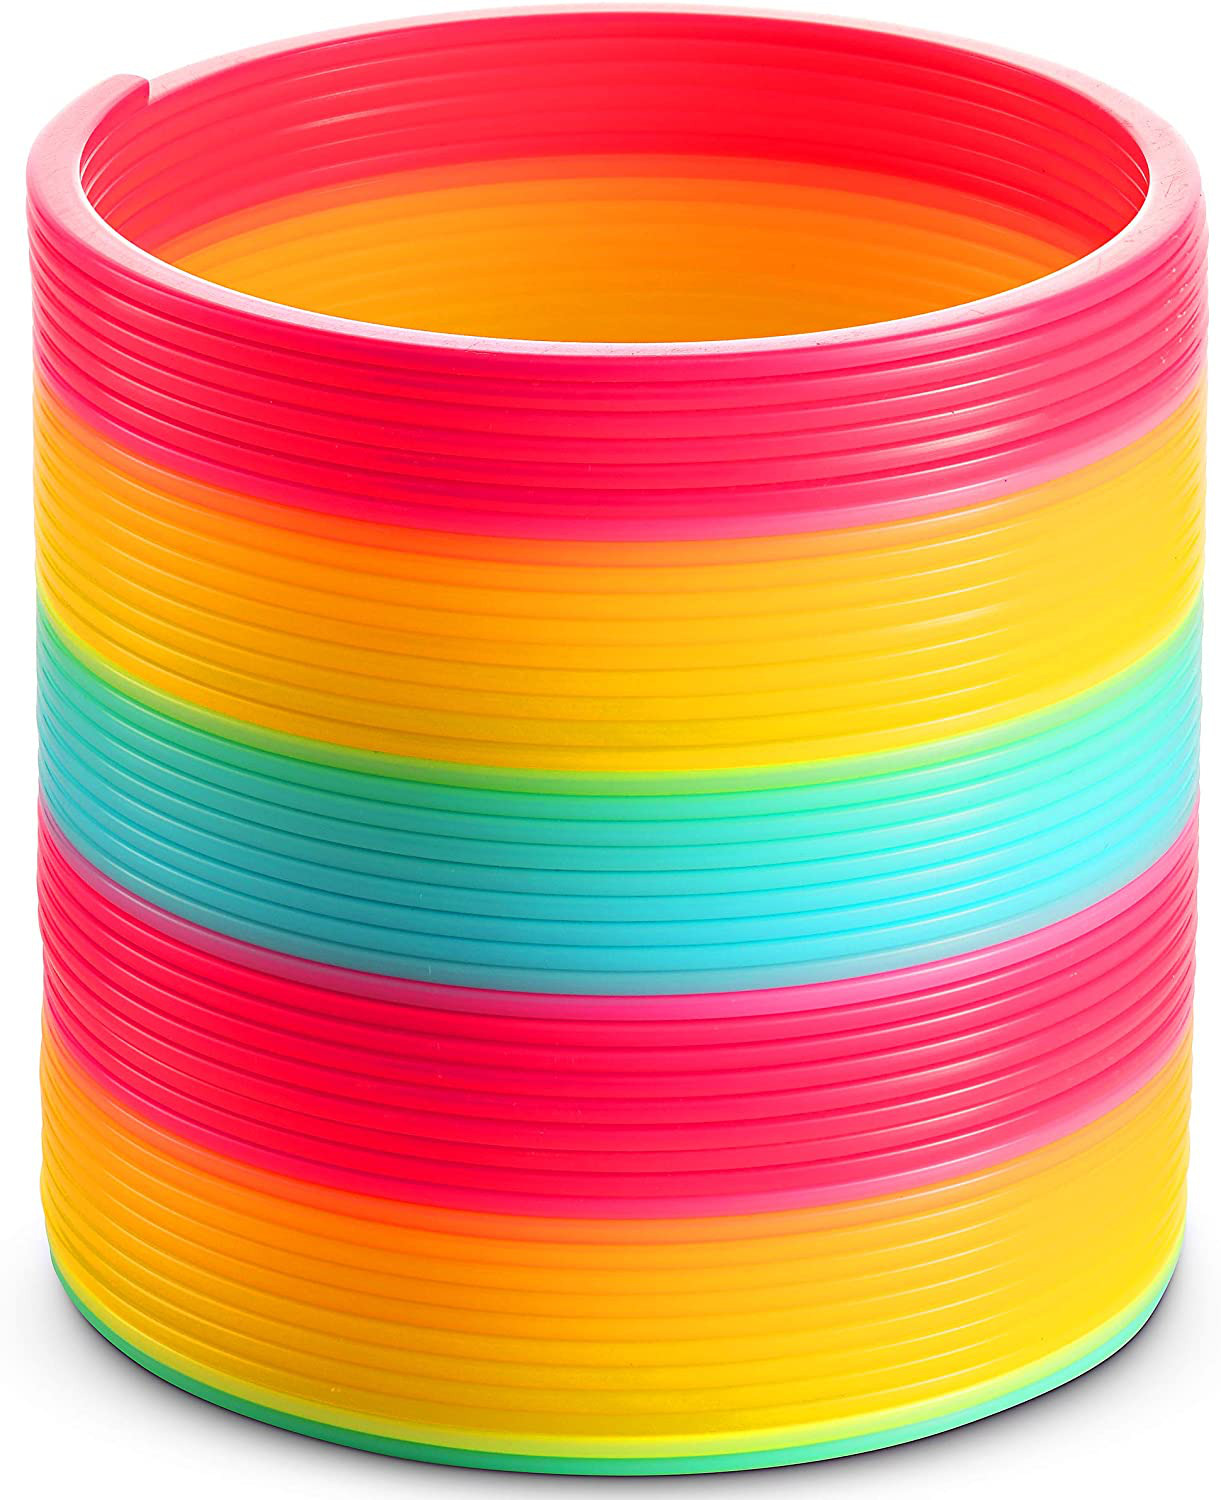 Jumbo Rainbow Coil Spring Toy - 6 Inch Giant Magic Spring Toys For Kids, A Huge